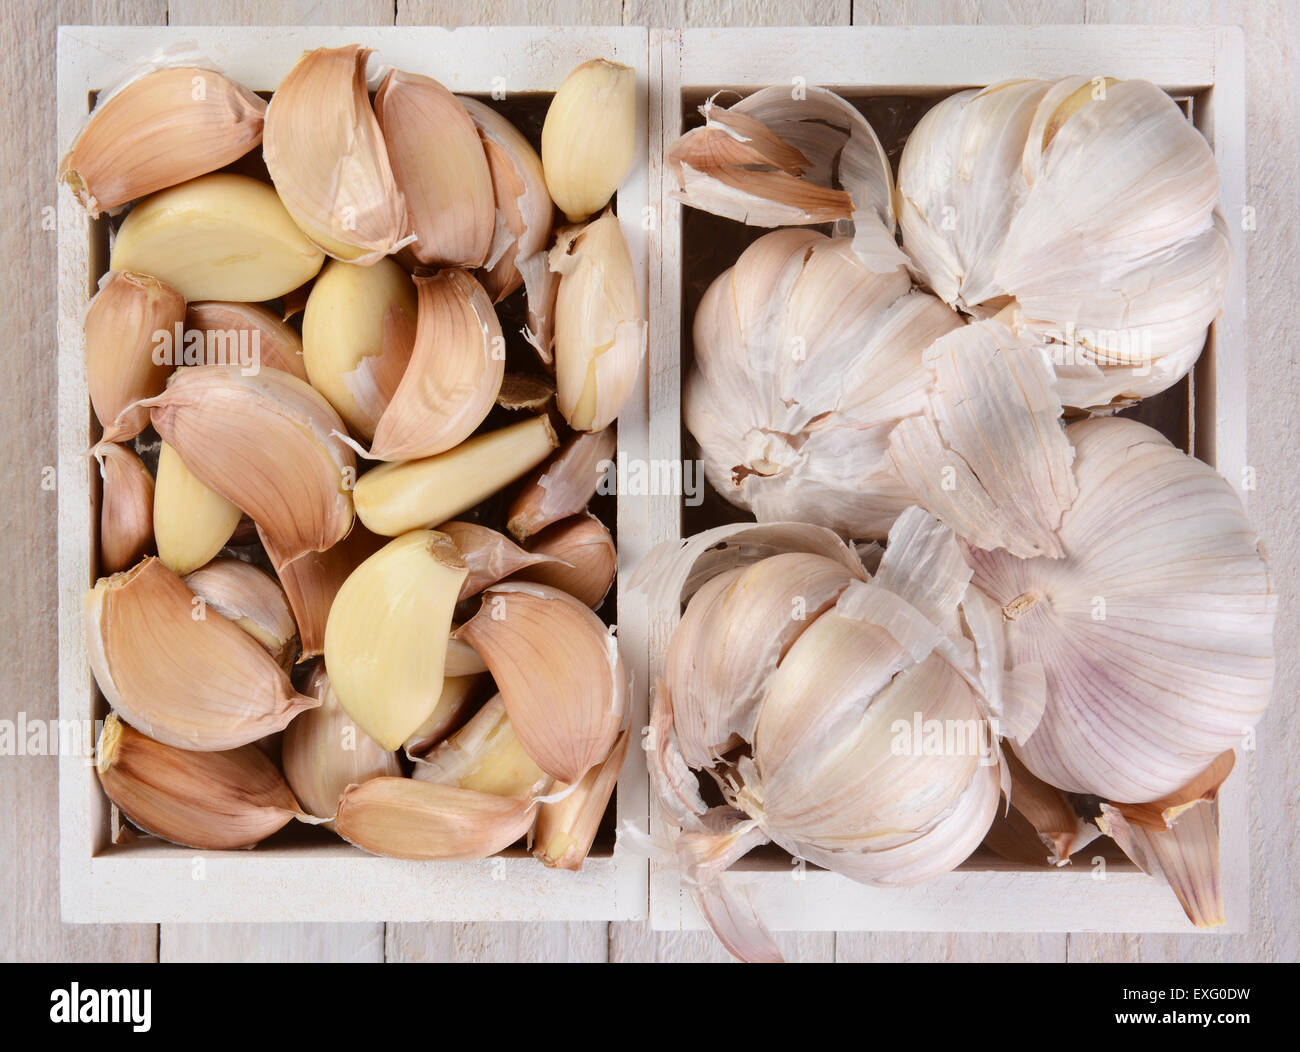 High angle view of garlic bulbs and cloves in small white wood crates. Stock Photo